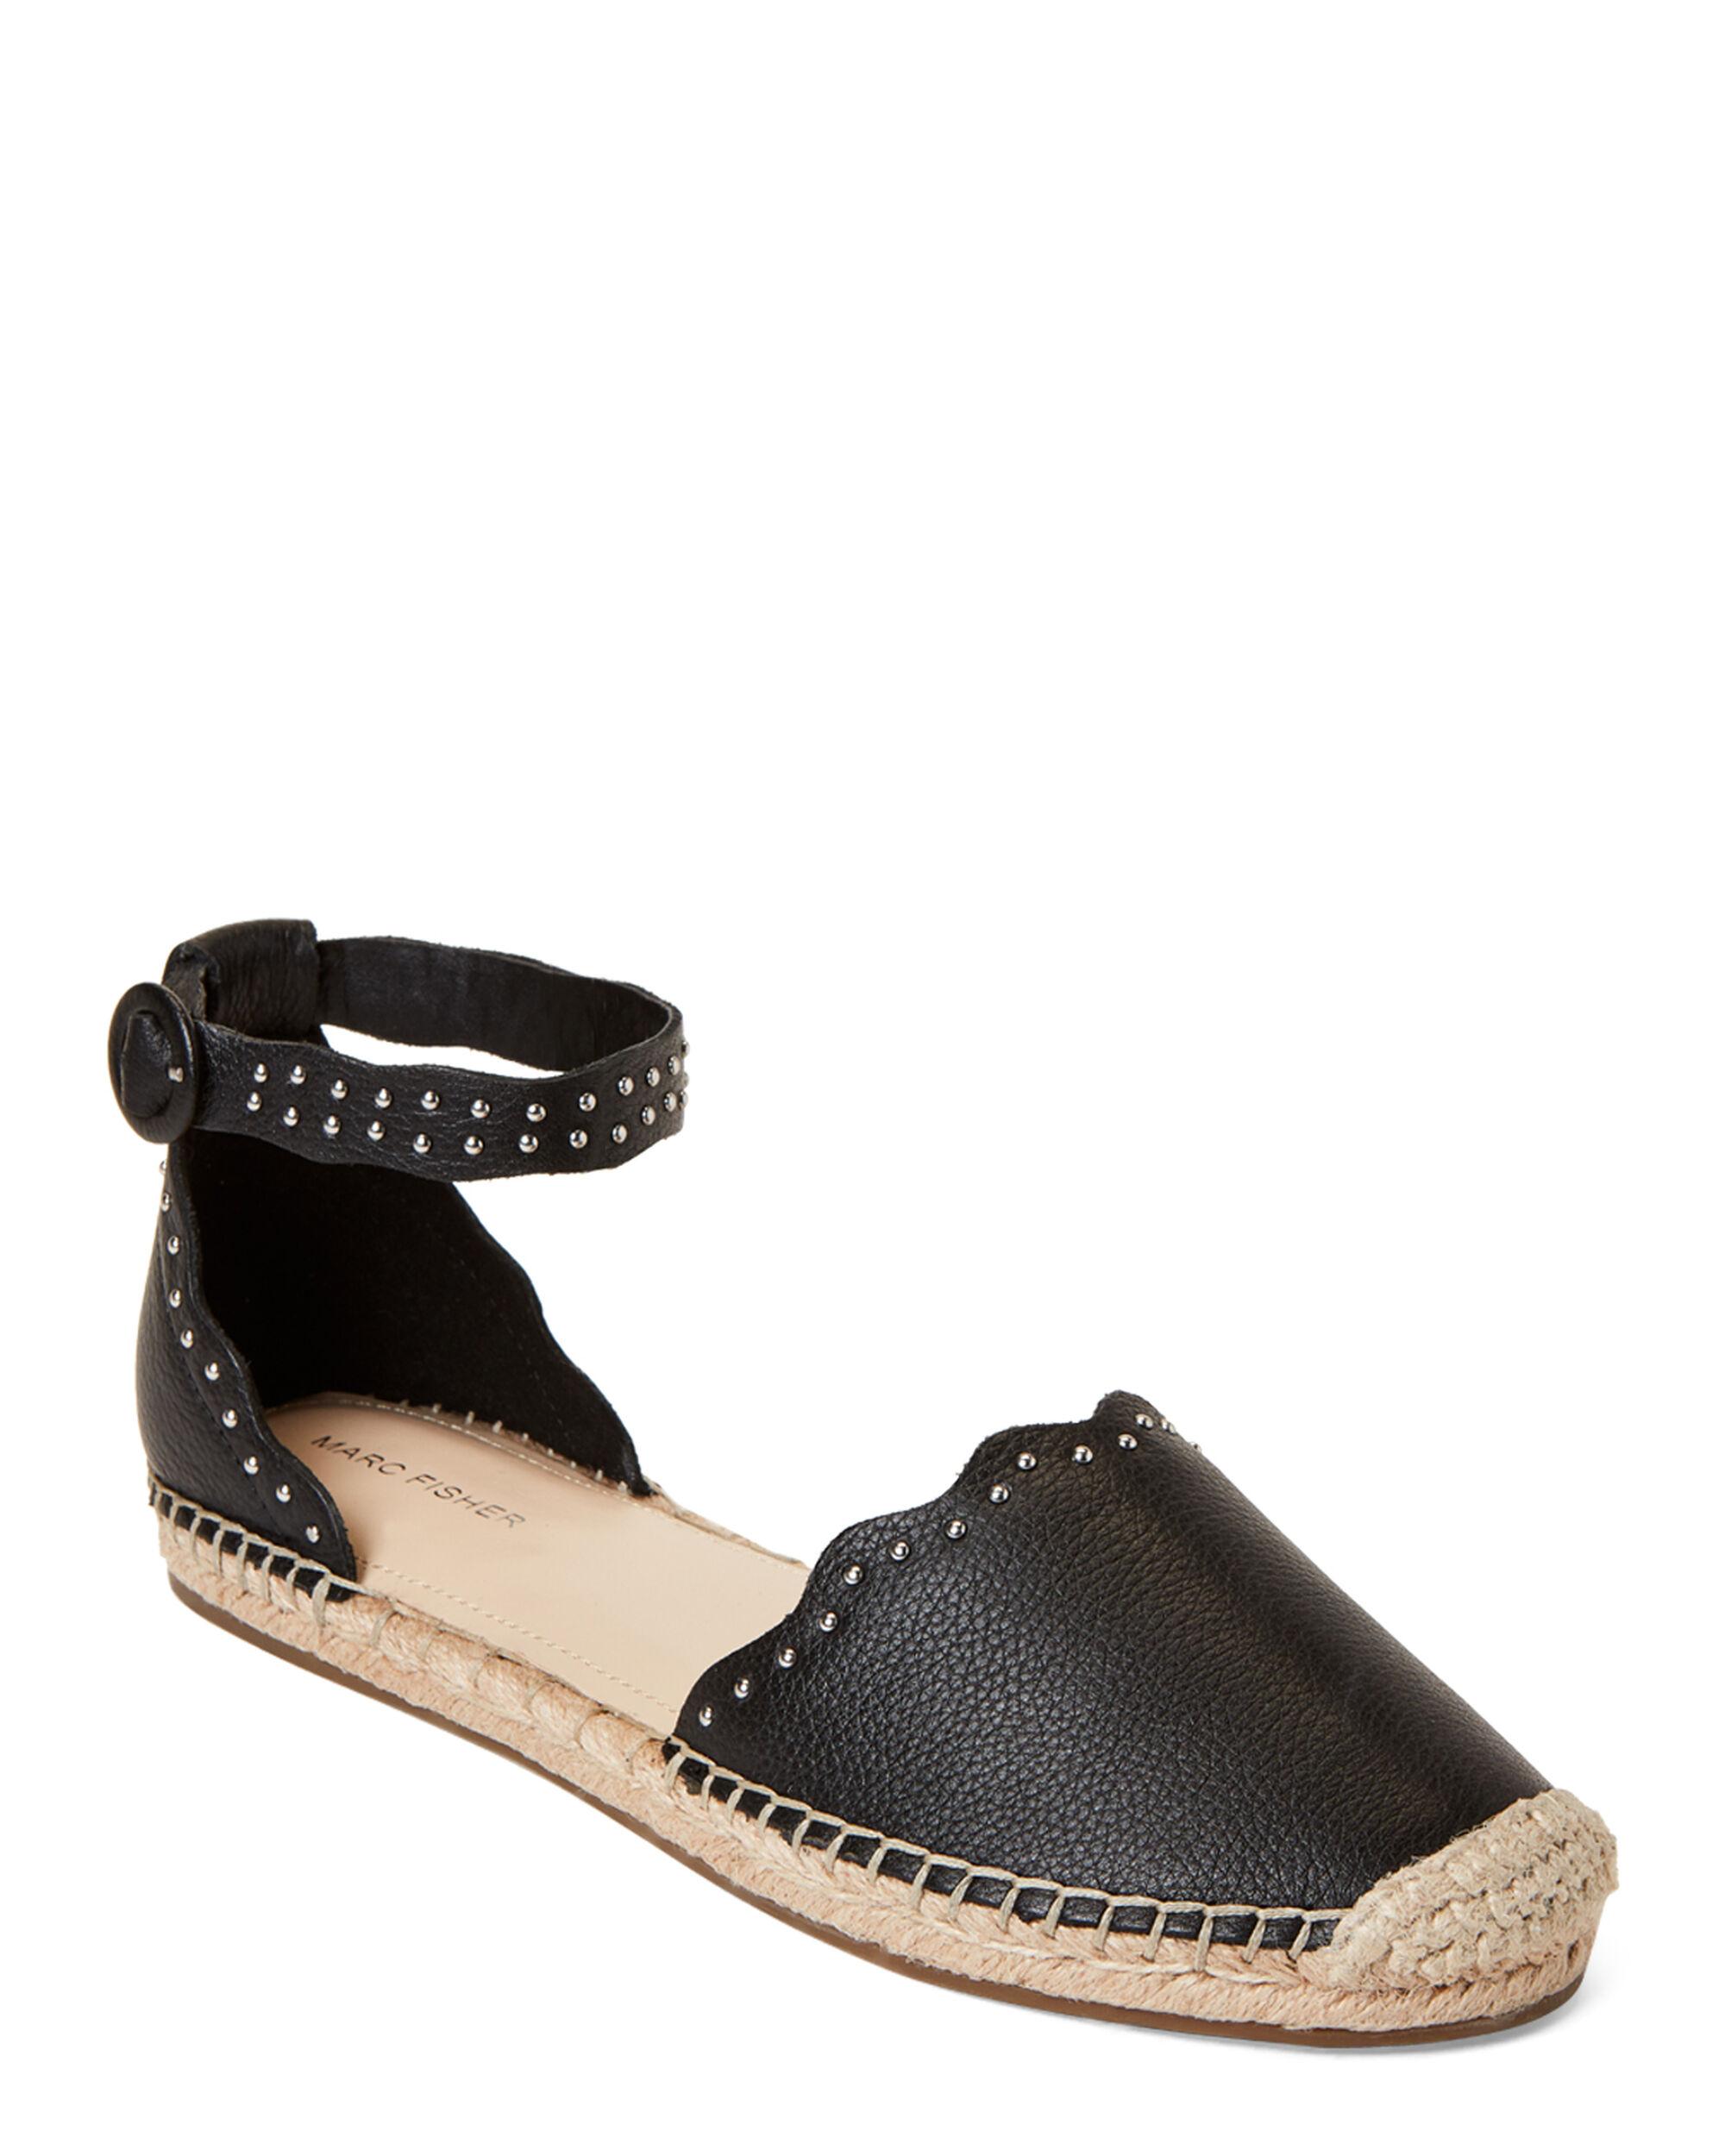 Marc Fisher Black Jarquis Studded Leather Espadrilles Lyst